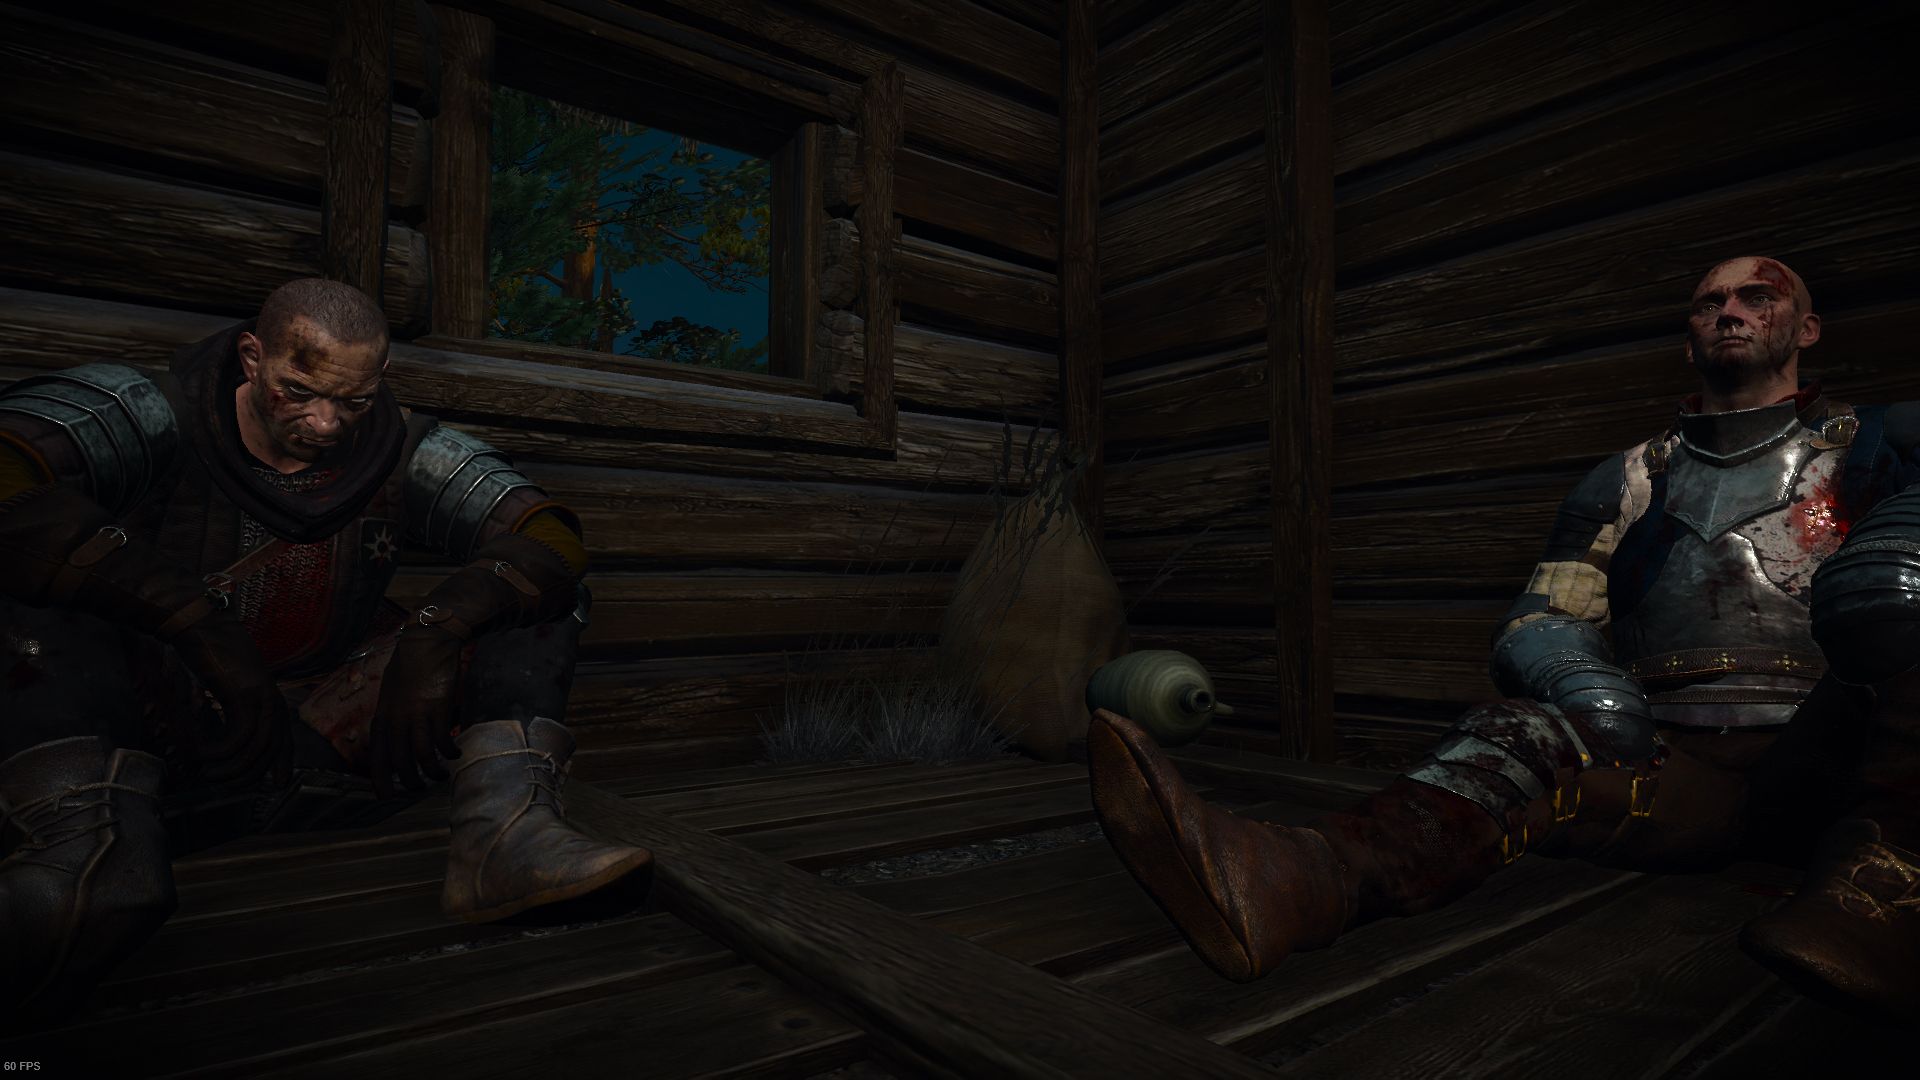 A pair of men shelter in an abandoned hut, covered in blood and damaged armor.